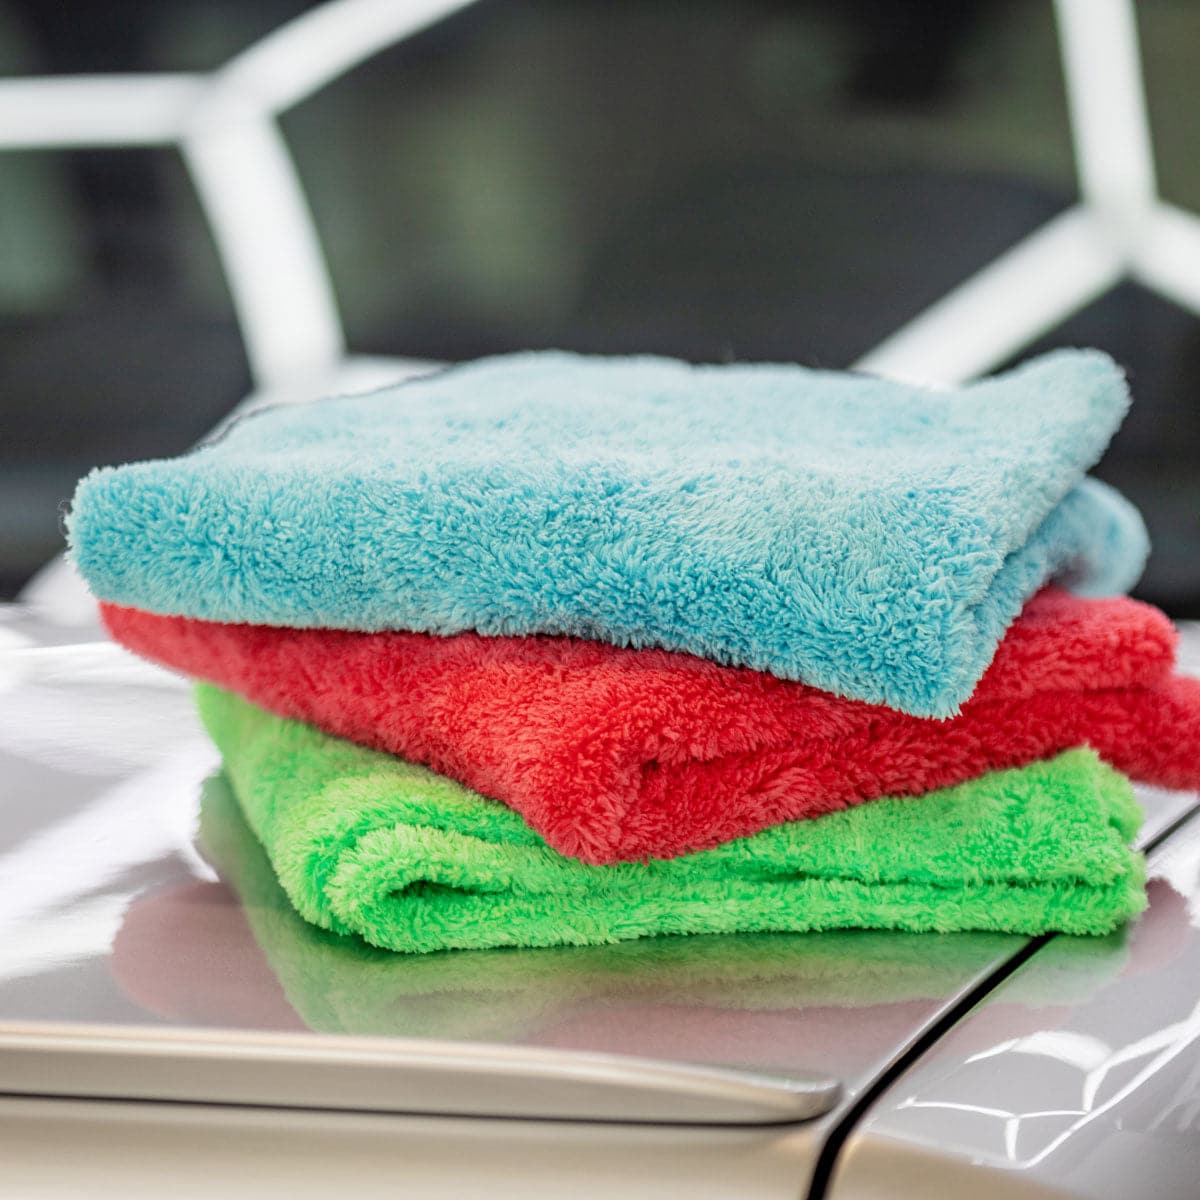 Signature Microfiber Towels for Polishing, Buffing and Touch-ups